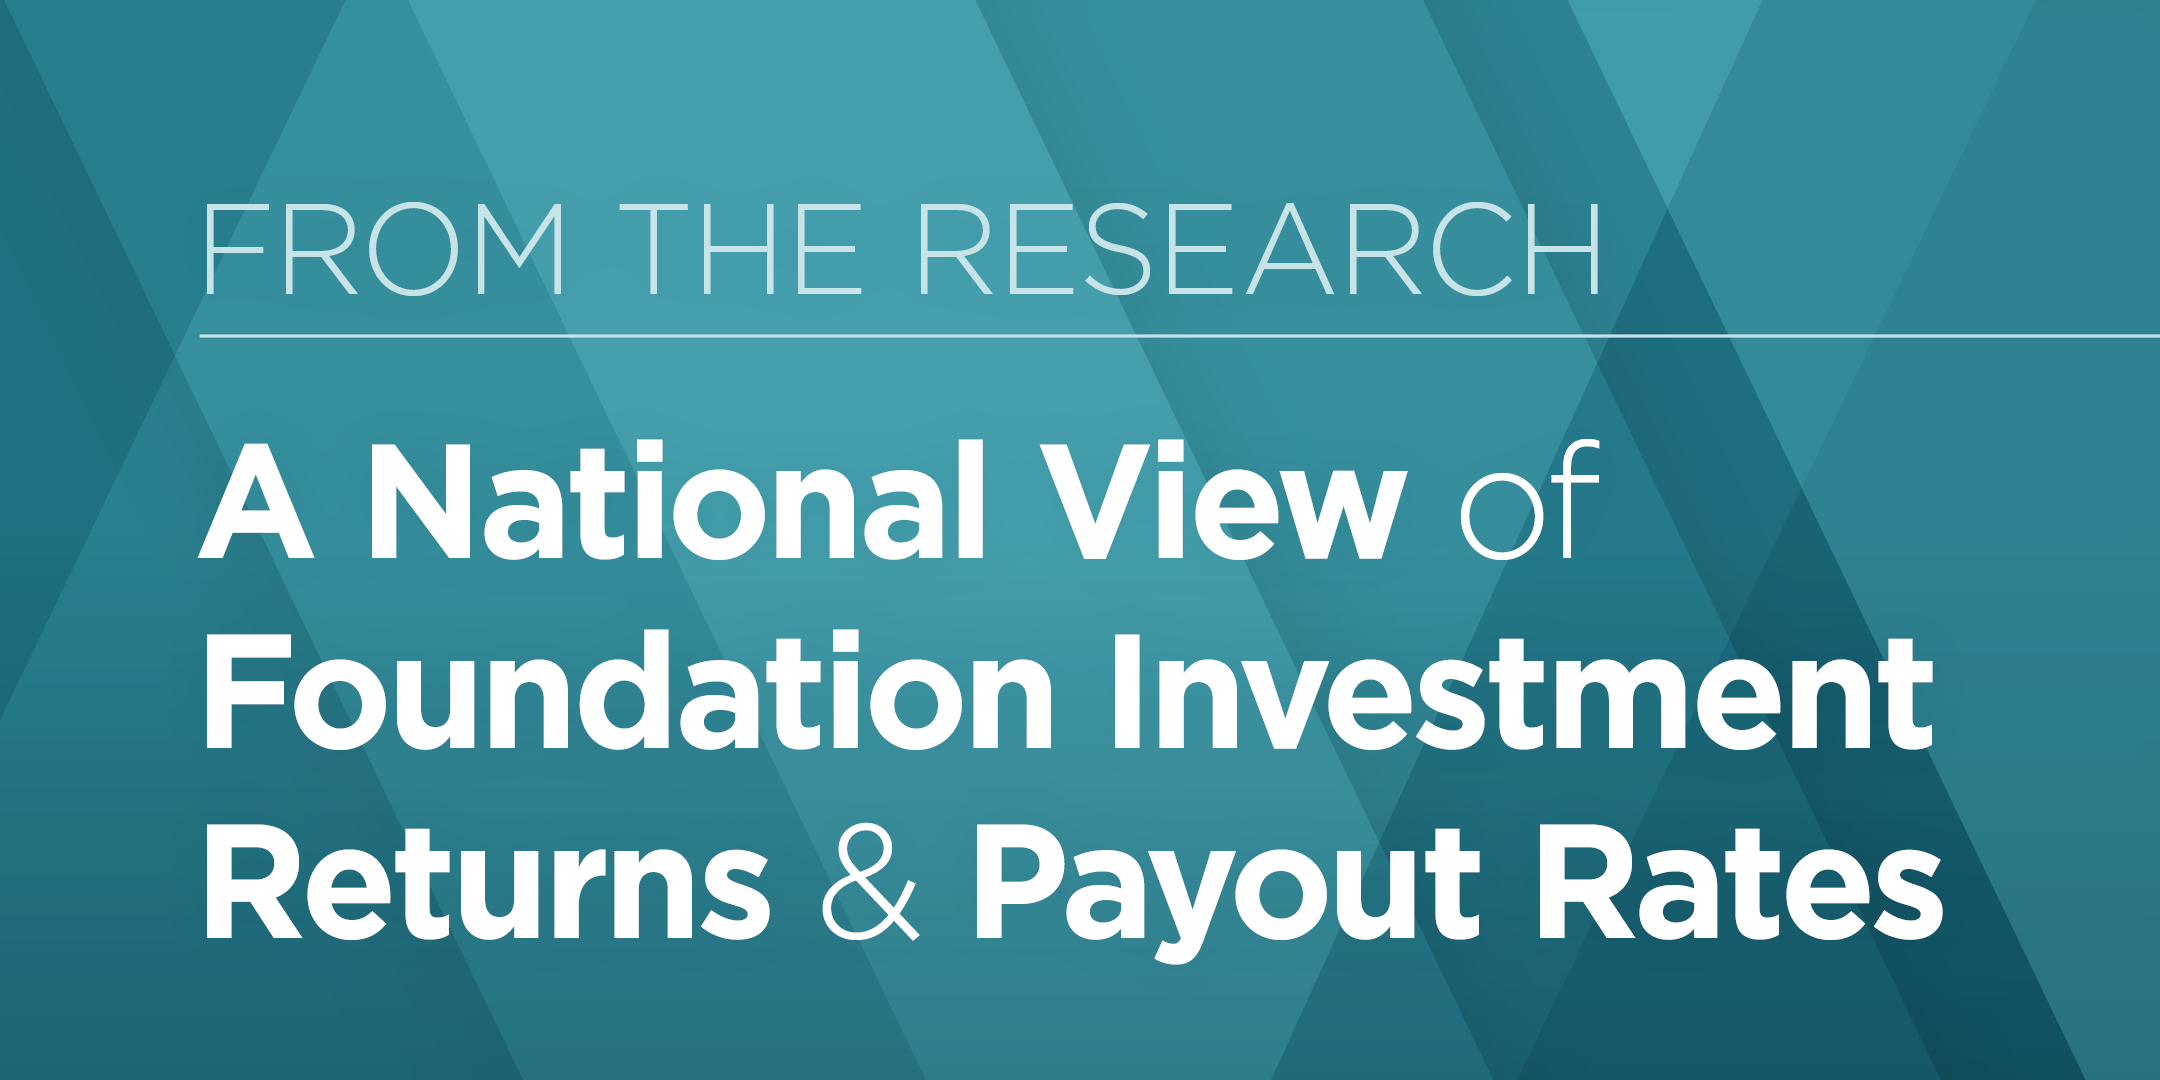 From the Research: A National View of Foundation Investment Returns & Payout Rates